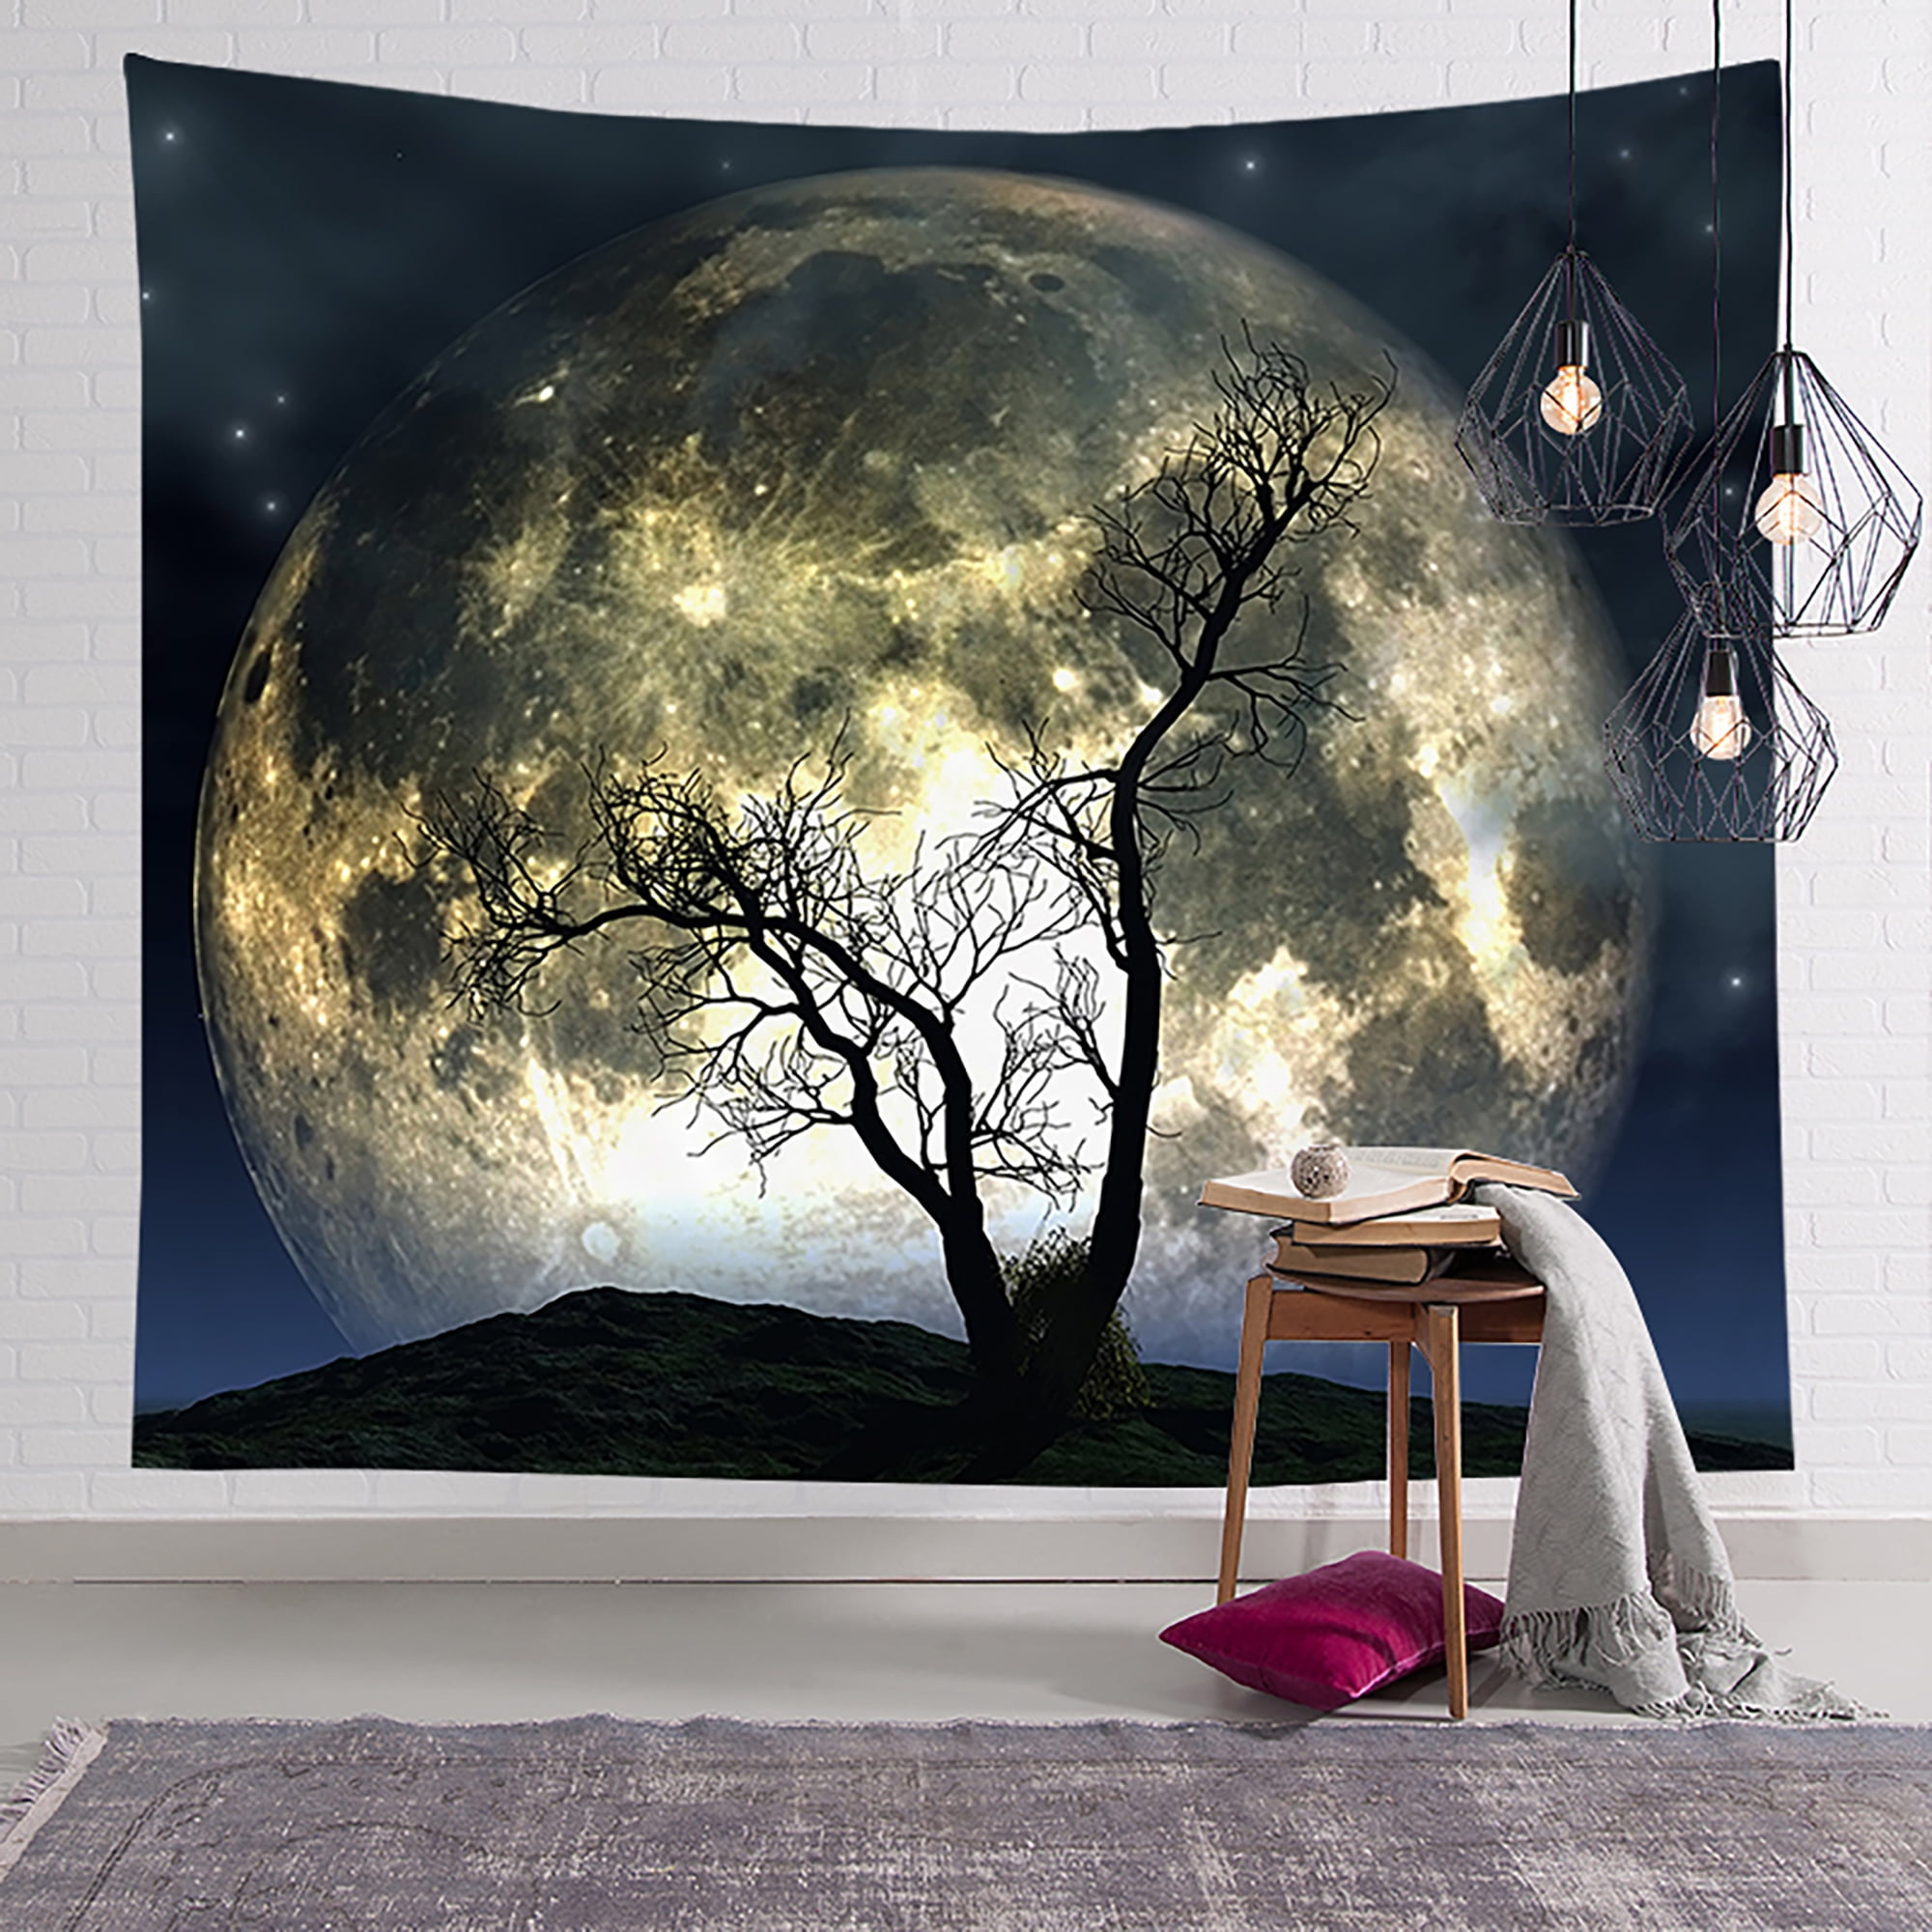 CUH Large Wall Hanging Landscape Fantasy Throw Tapestry Bedspread Blanket Home Decor Outdoor